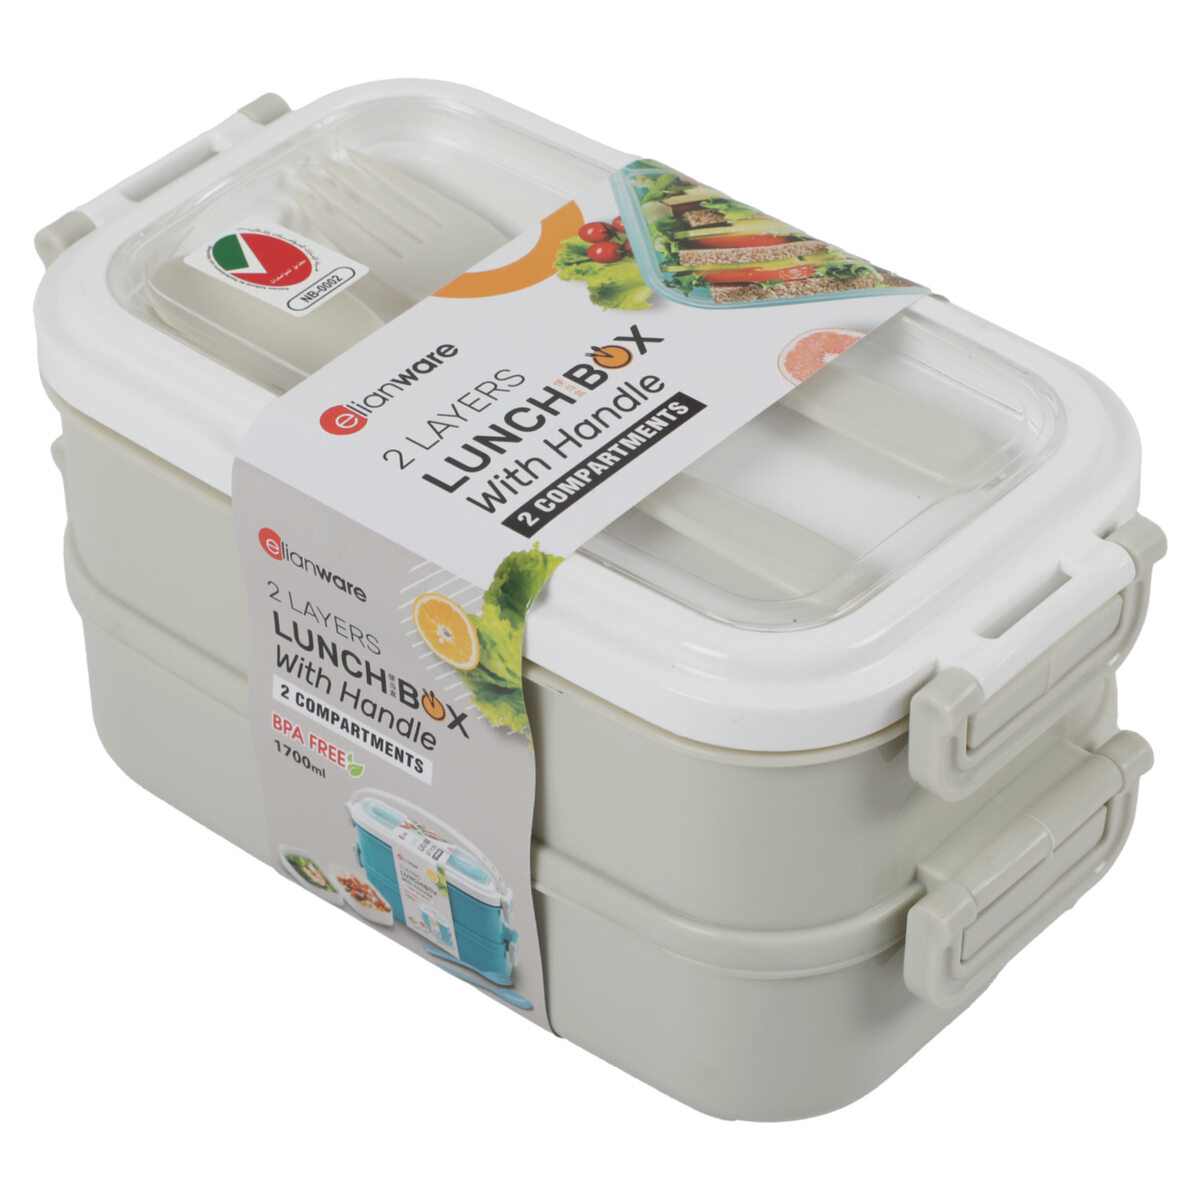 Elianware Lunch Box 2Layer 1.7Ltr